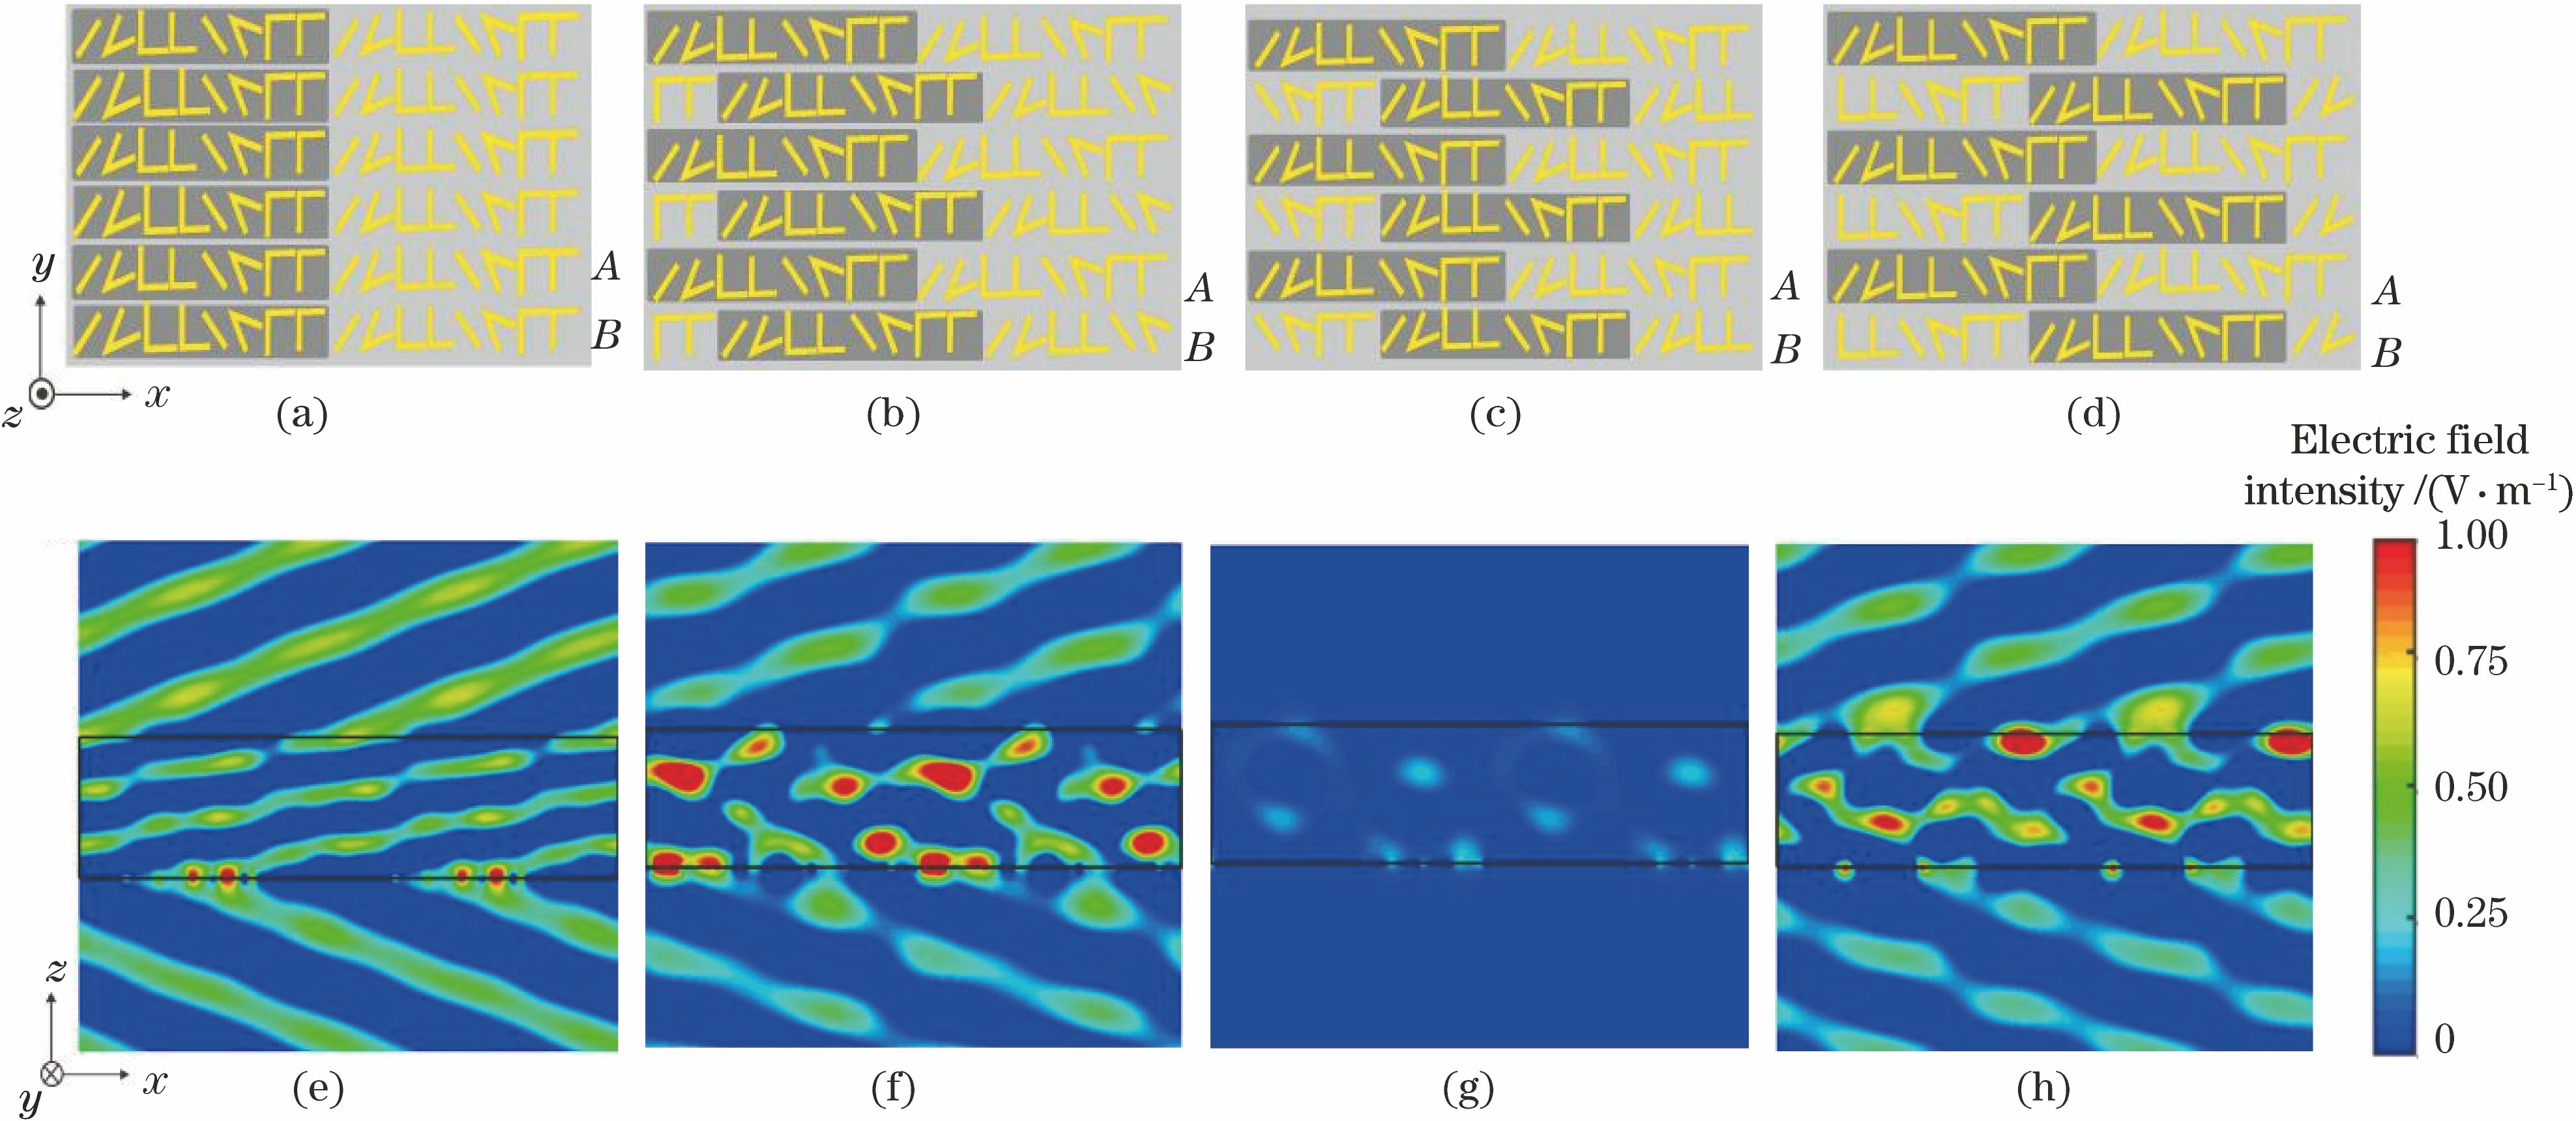 Metasurface structures (top) and corresponding electric field distributions of abnormally refracted cross-polarized light in x direction (bottom). Staggered distance: (a)(e) 0; (b)(f) 1/4 period; (c)(g) 2/4 period; (d)(h) 3/4 period